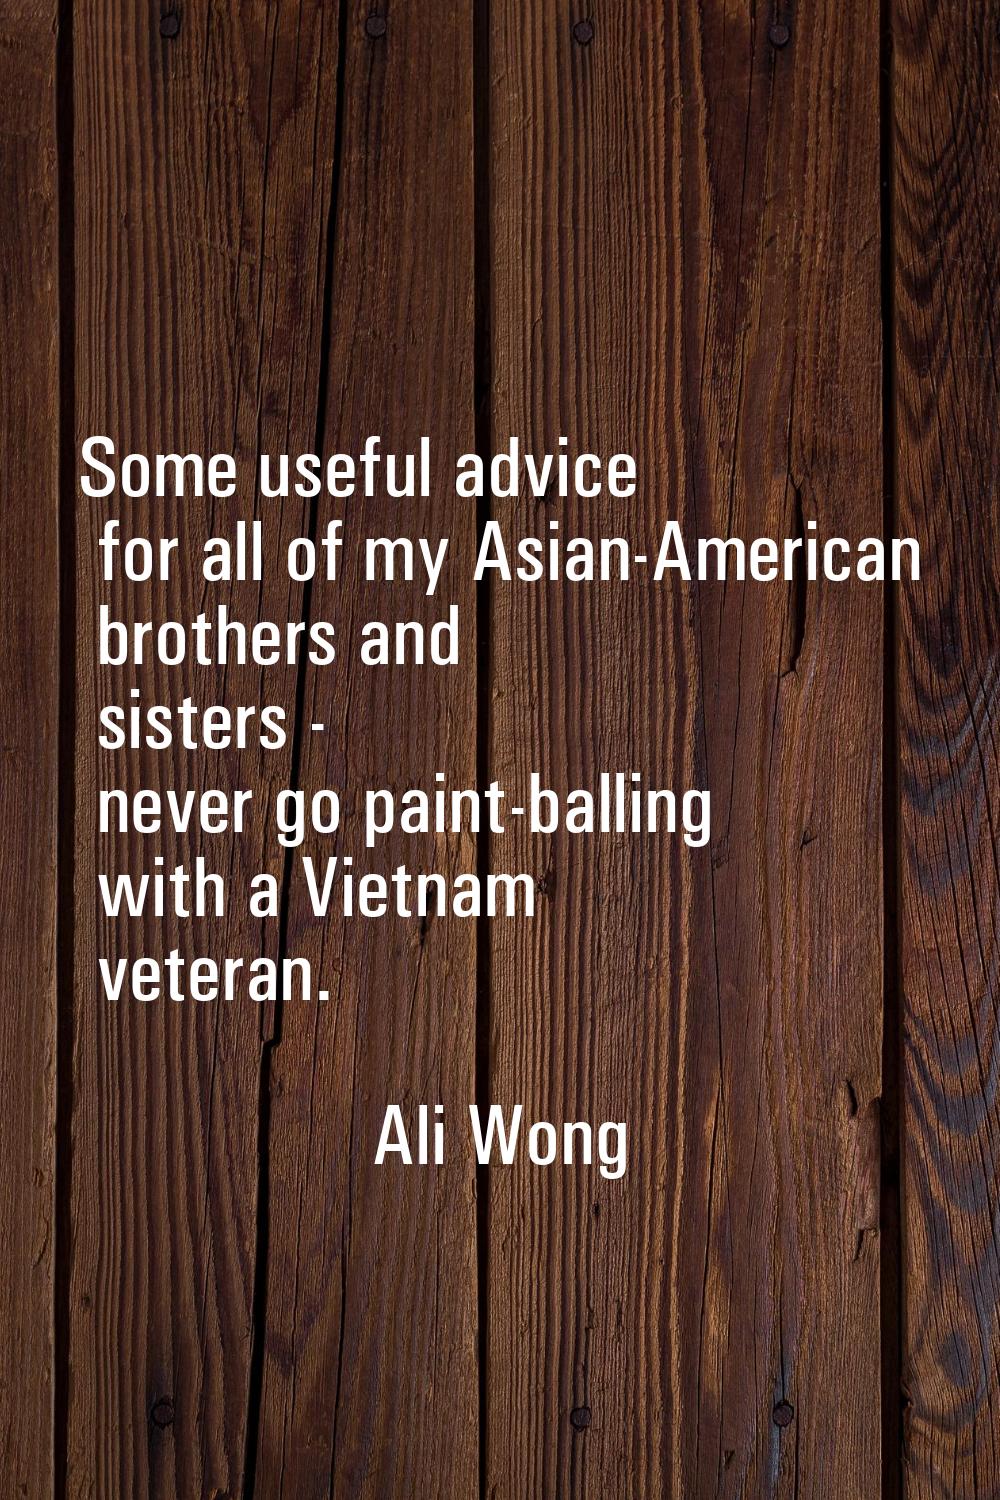 Some useful advice for all of my Asian-American brothers and sisters - never go paint-balling with 